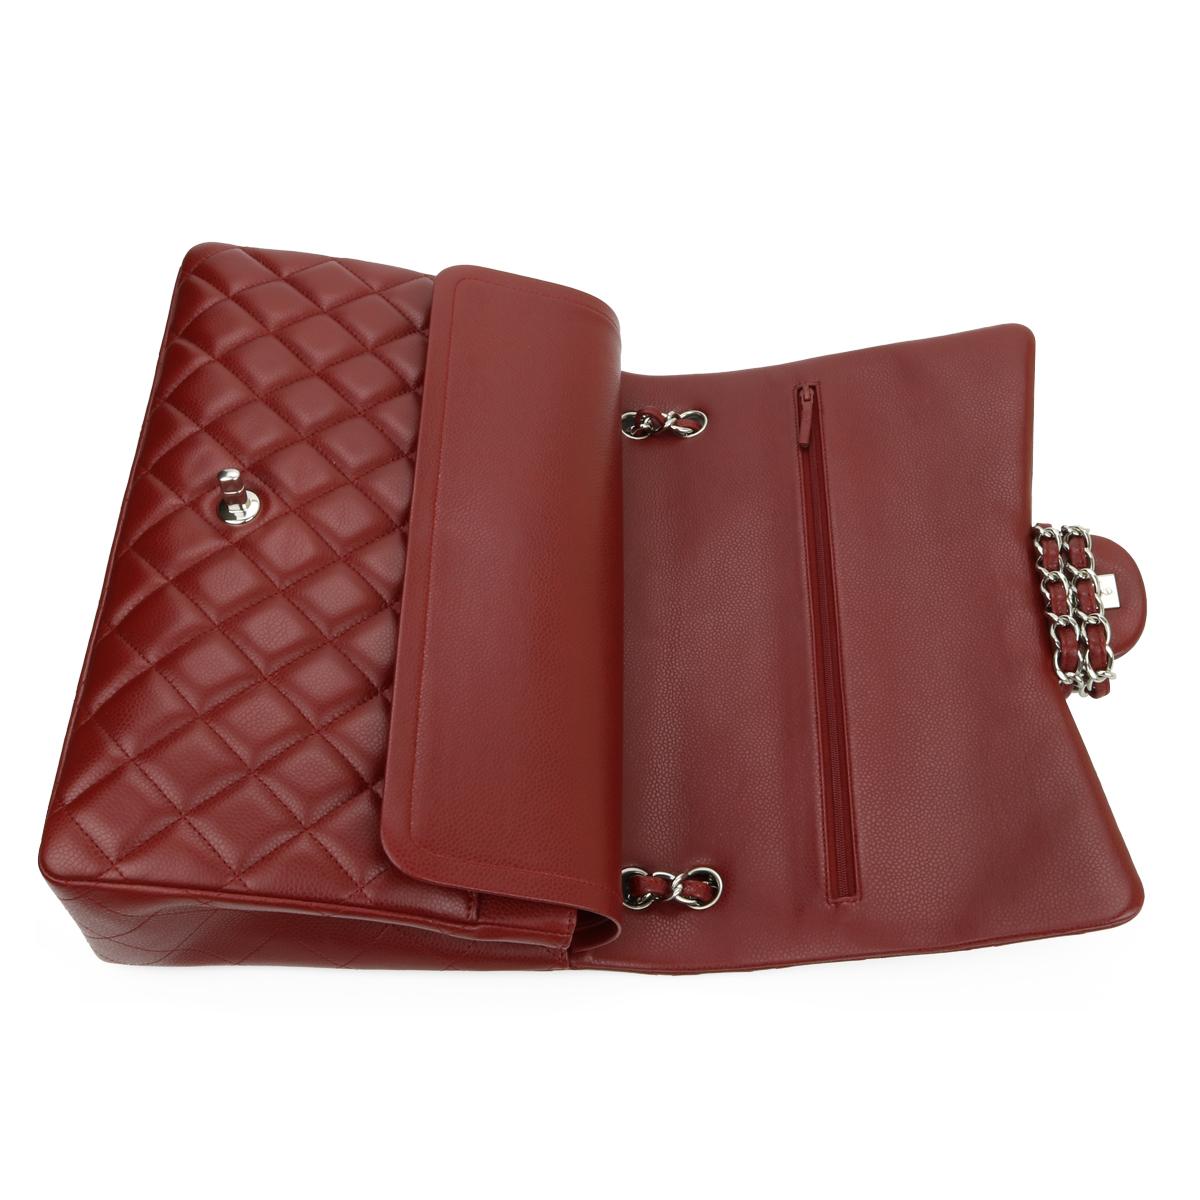 CHANEL Double Flap Maxi Bag Dark Red Burgundy Caviar with Silver Hardware 2011 5